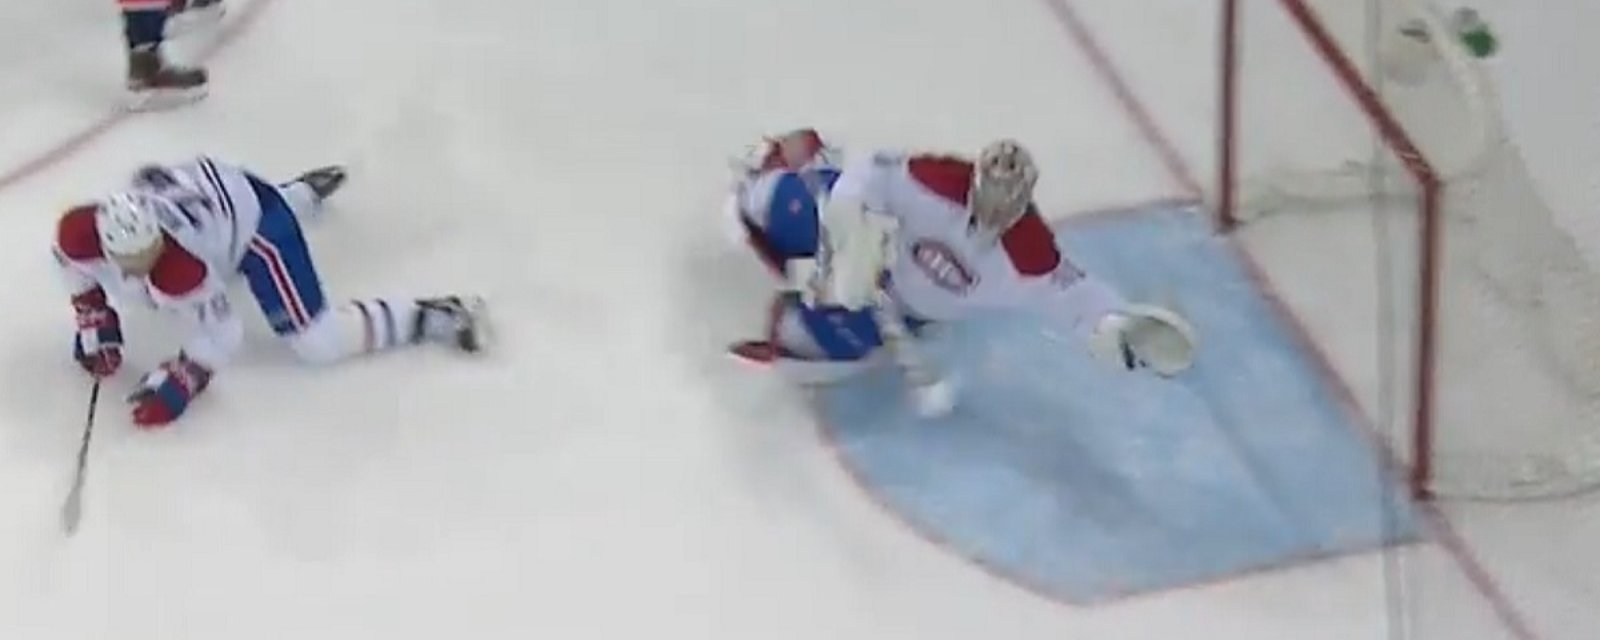 Carey Price may have just made the save of the year!